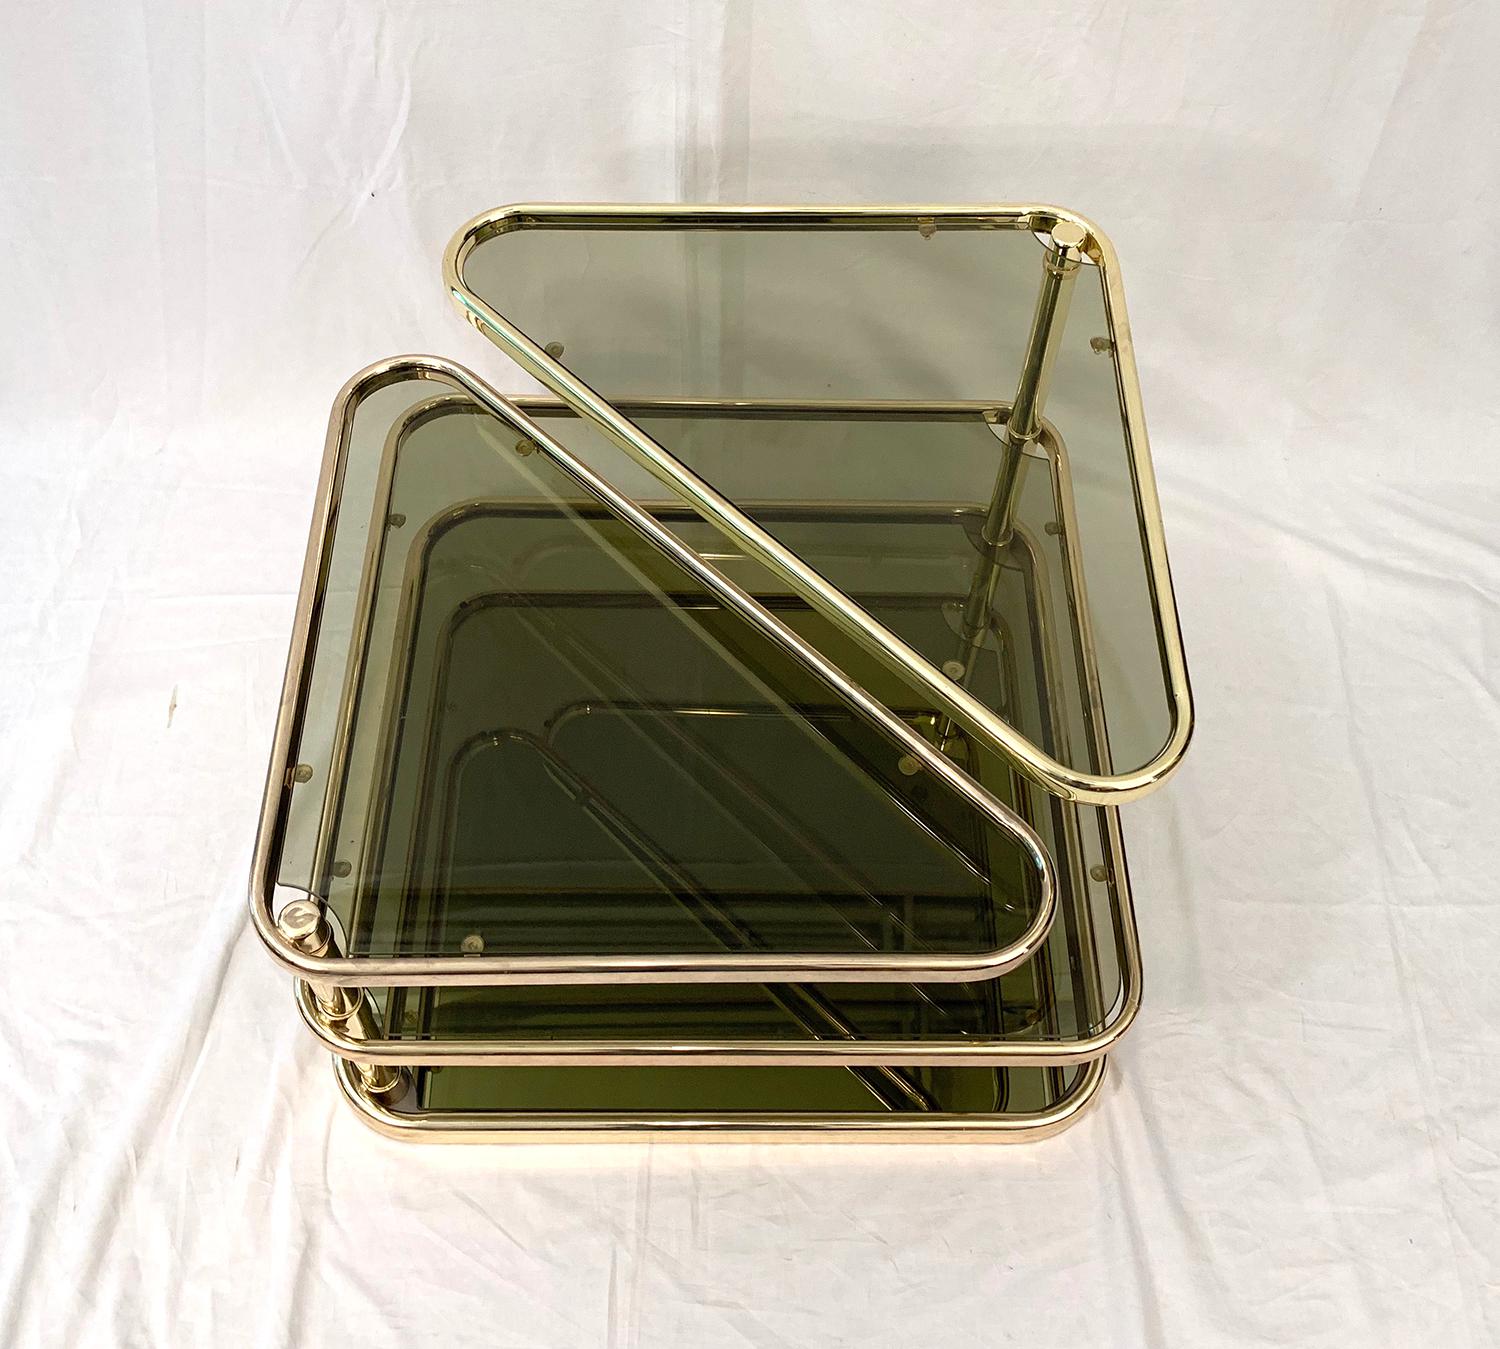 Very beautiful coffee table, composed of four trays whose two superiors are pivoting. The ground level plateau is in a golden mirror with a very slight green reflection and the three upper trays are in smoked glass. The metal structure is clad in